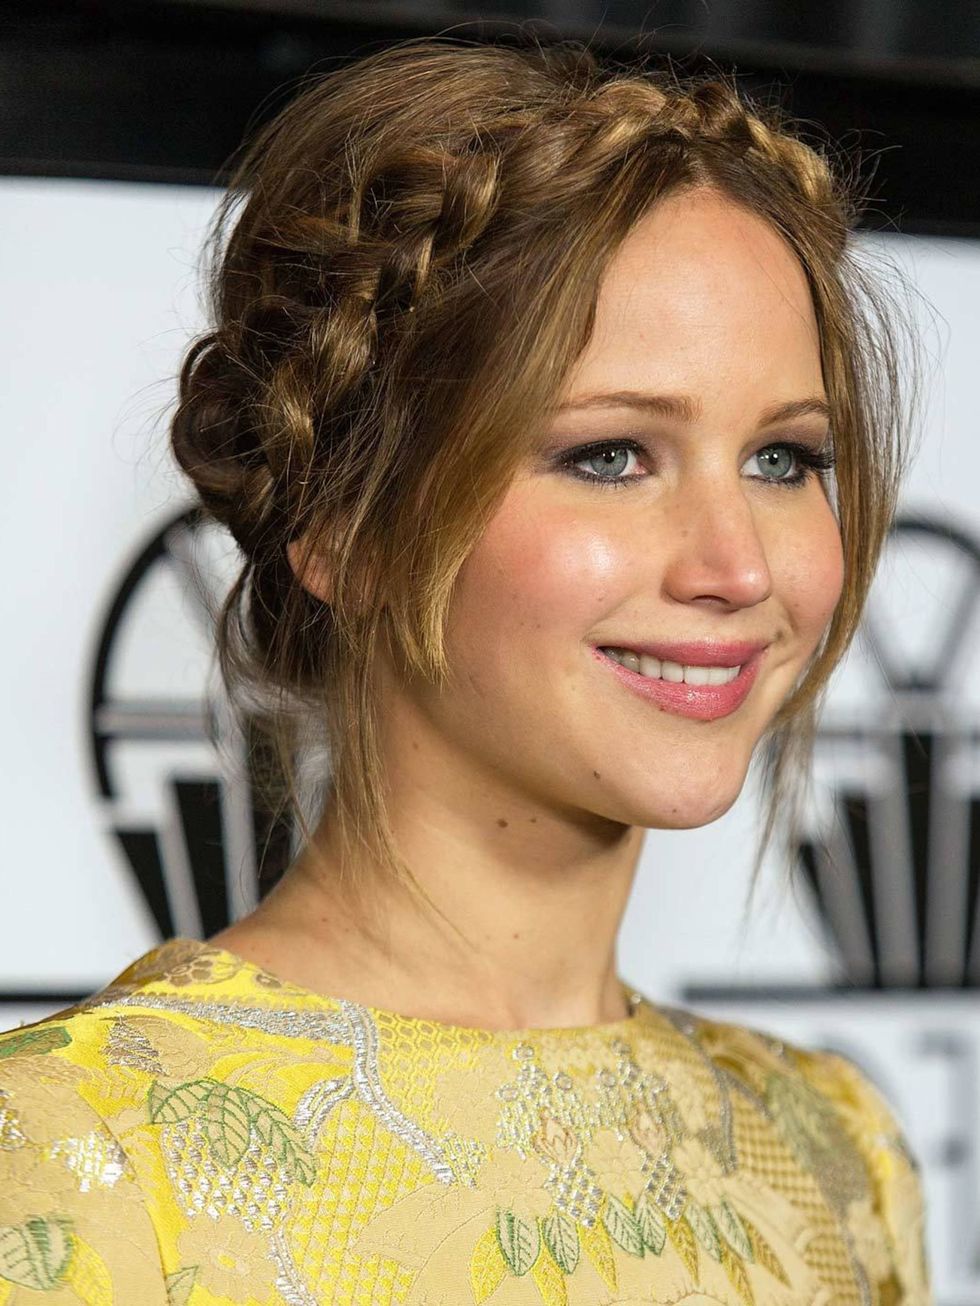 <p><strong>Jennifer Lawrence</strong></p><p>This girl addresses a crowd really well - and when we say well, we mean she is off-kilter hilarious and possibly a tiny bit drunk  fine attributes for a modern Queen.</p><p>Plus she looks unbelievable in <a hre